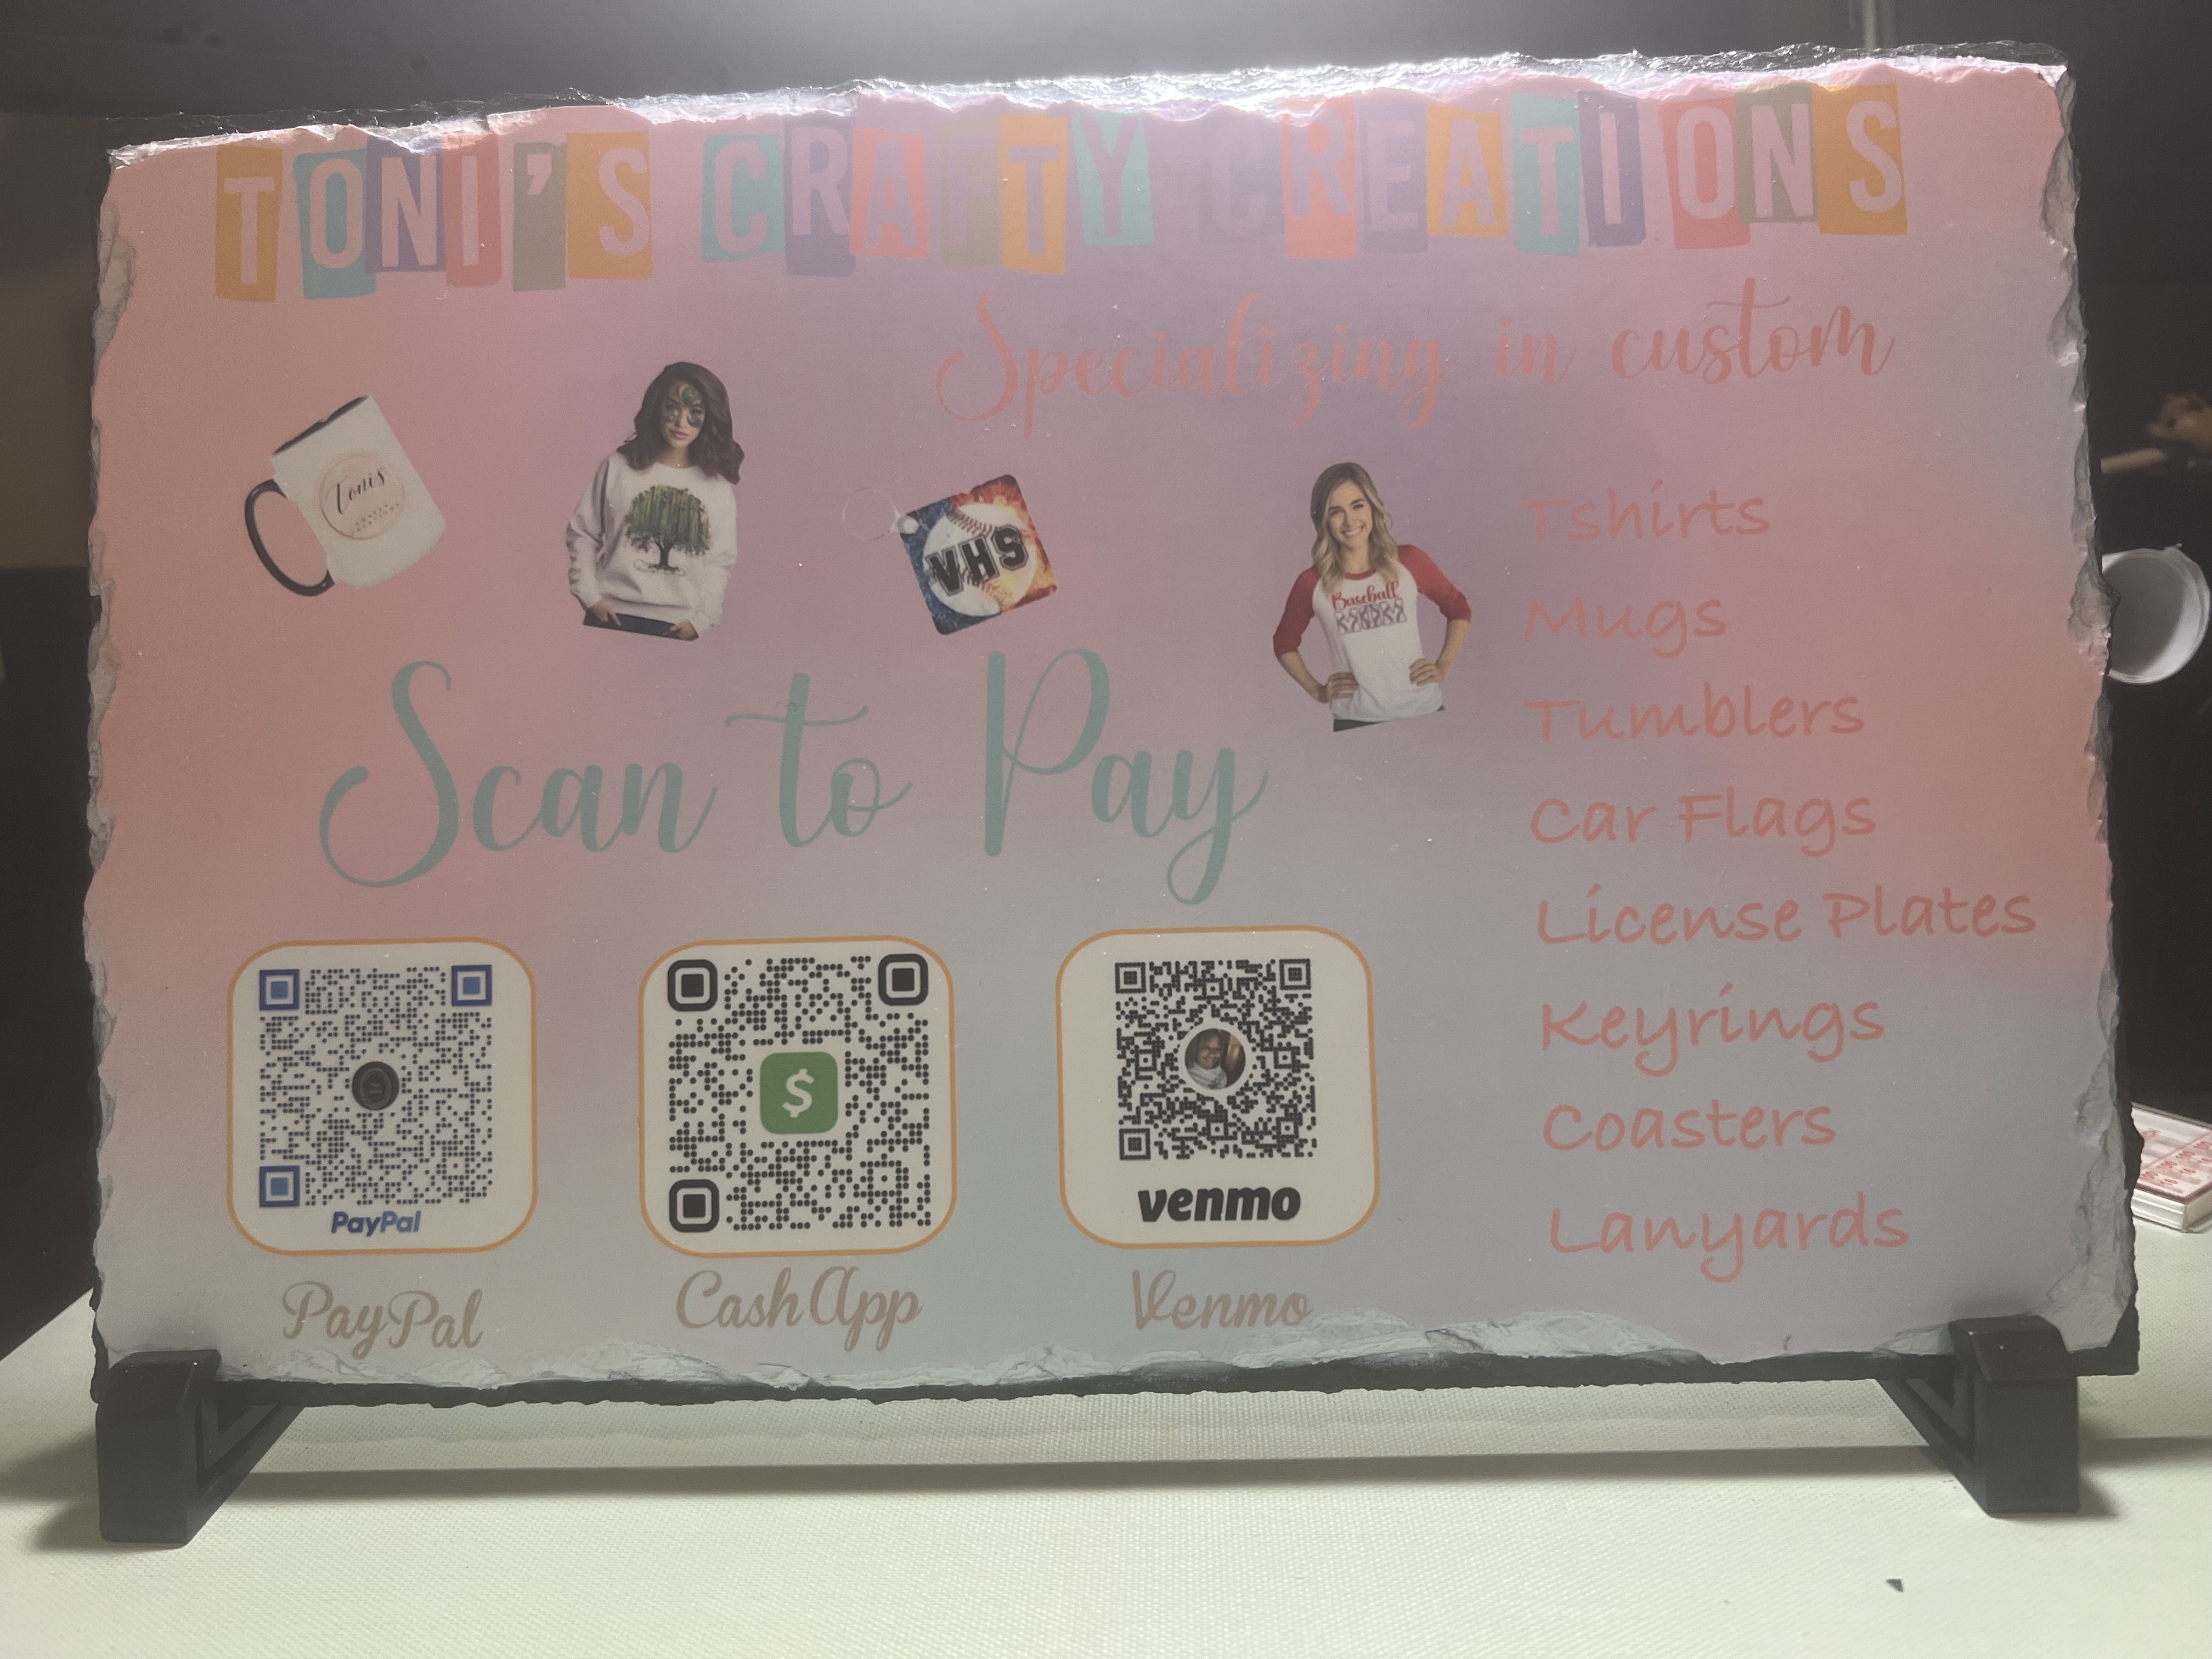 Pay Station made with sublimation printing